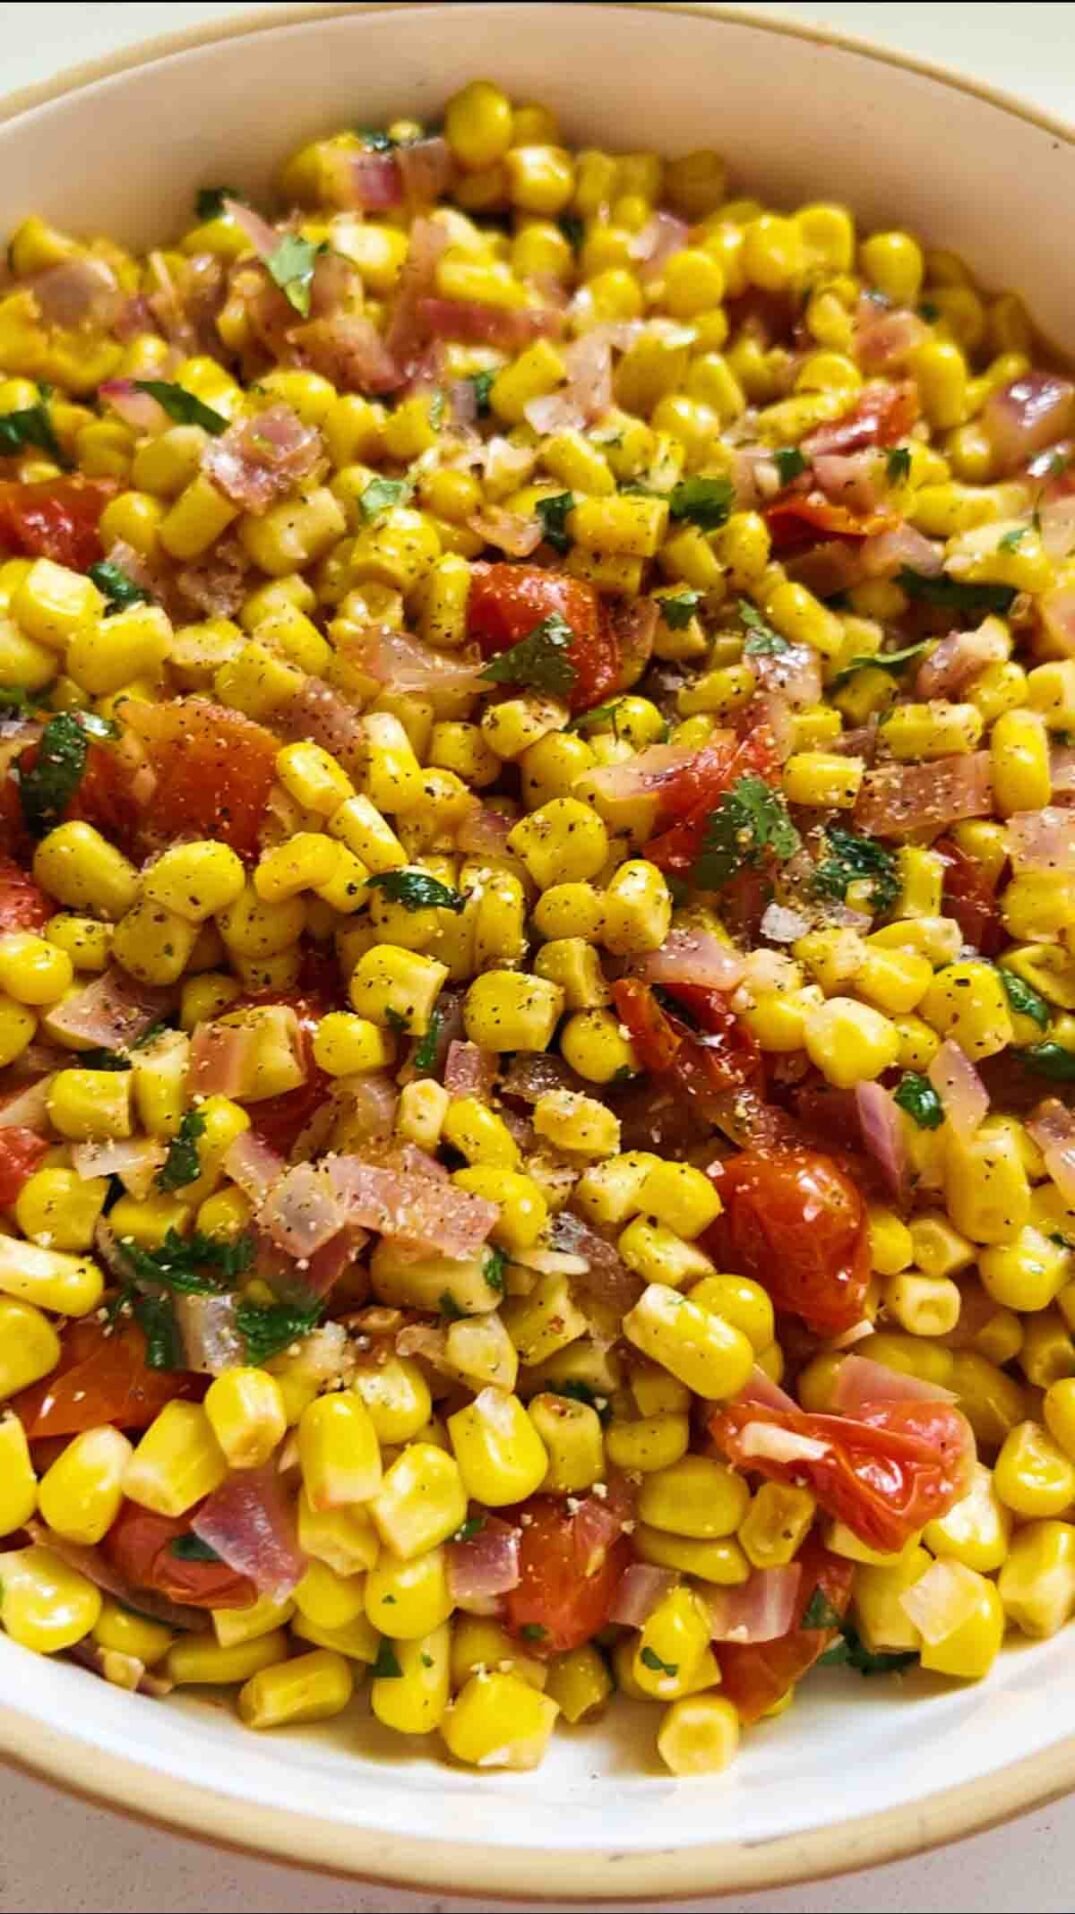 fresh corn, caramelized onions, tomatoes, cilantro and seasoning in a white bowl.